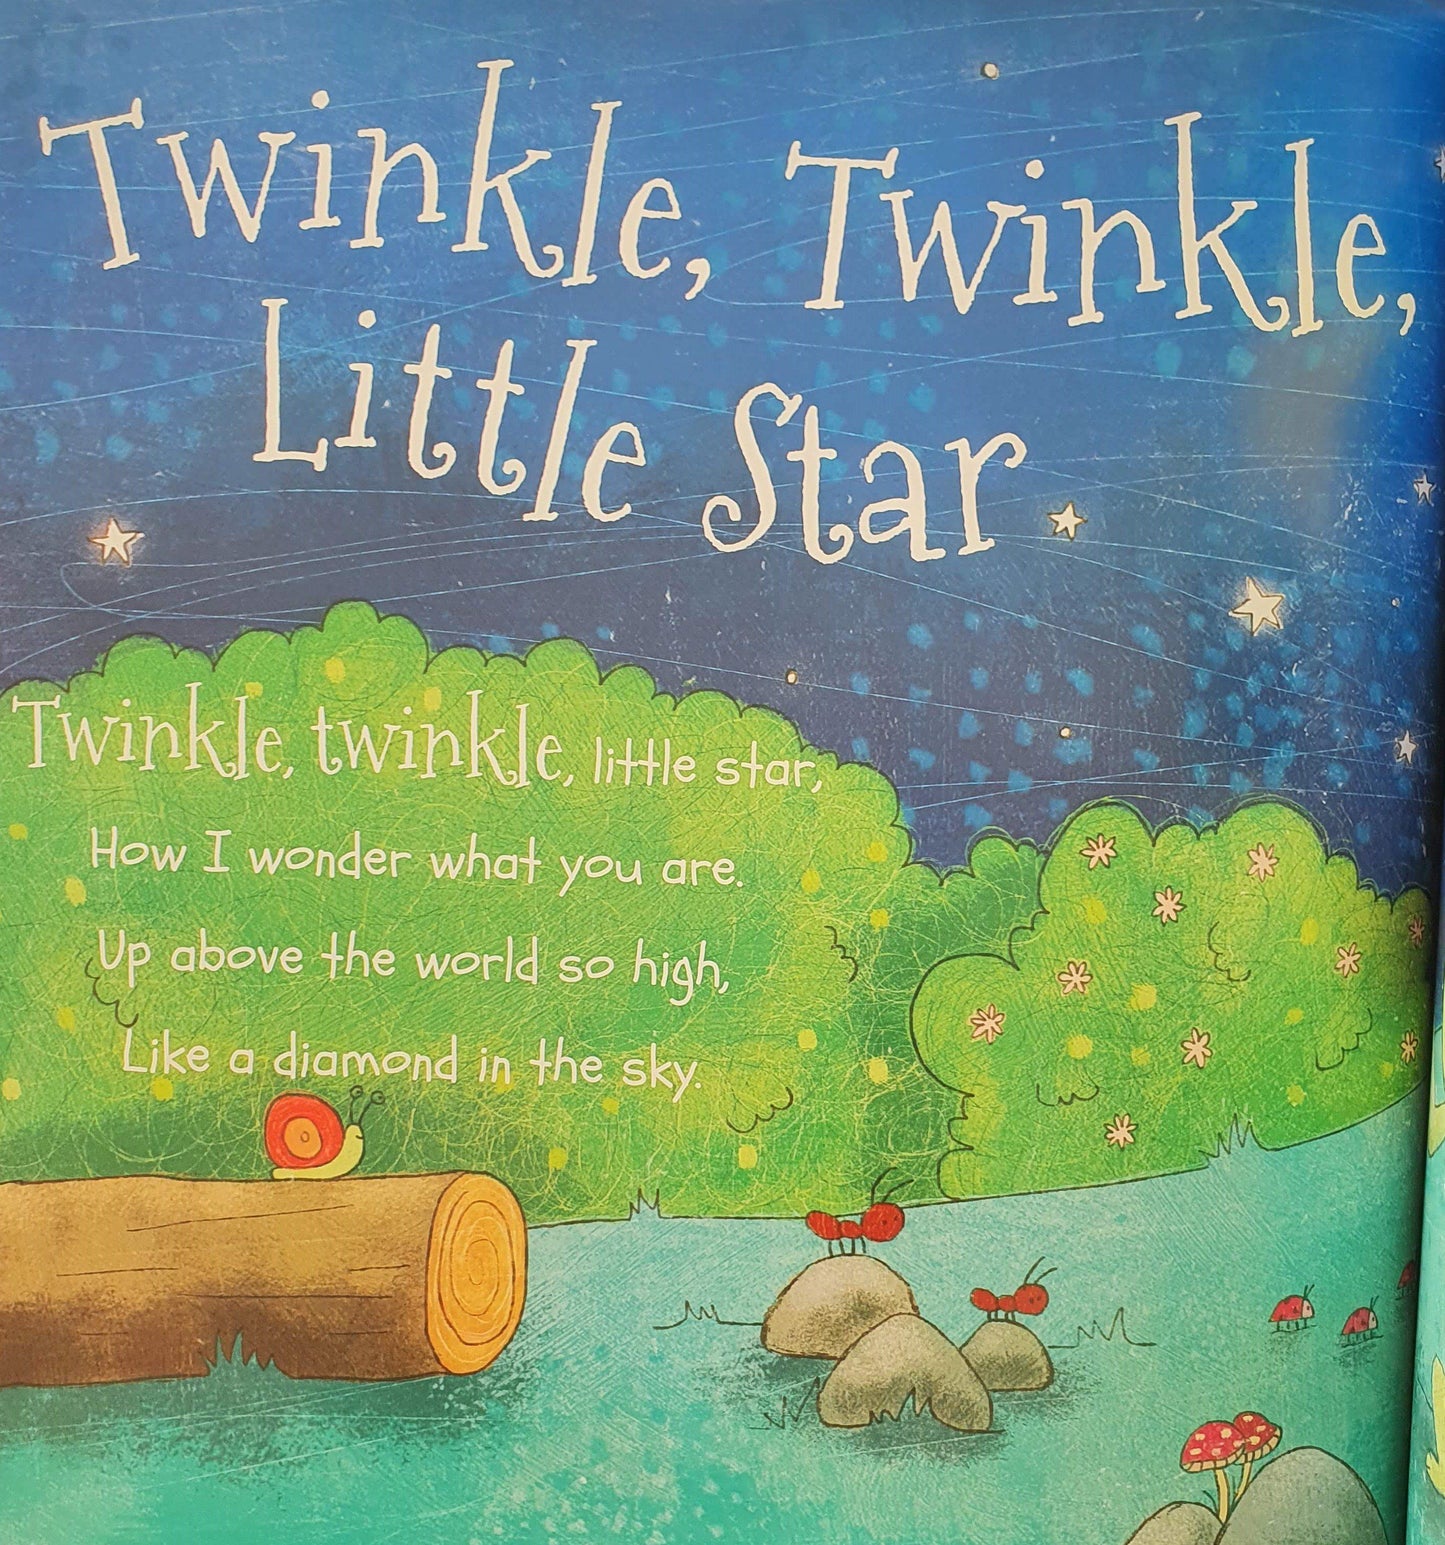 My Rhyme Time twinkle twinkle little start and other bedtime rhymes Very Good, 3+ Age Recuddles.ch  (6332491858105)